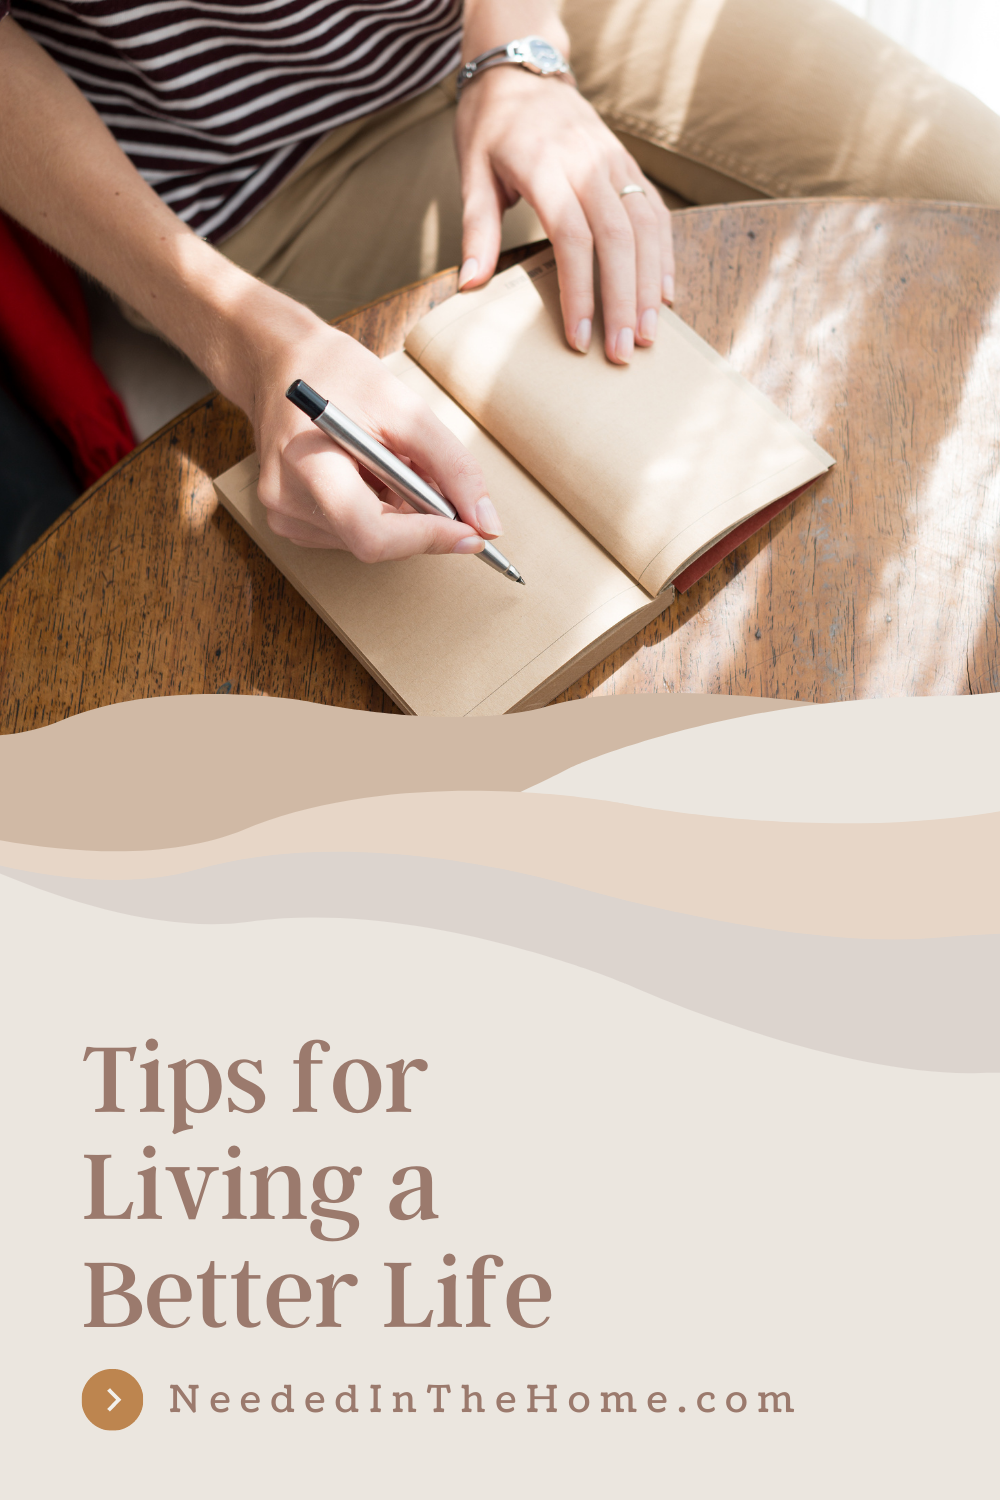 Tips for Living a Better Life woman writing ideas in journal neededinthehome